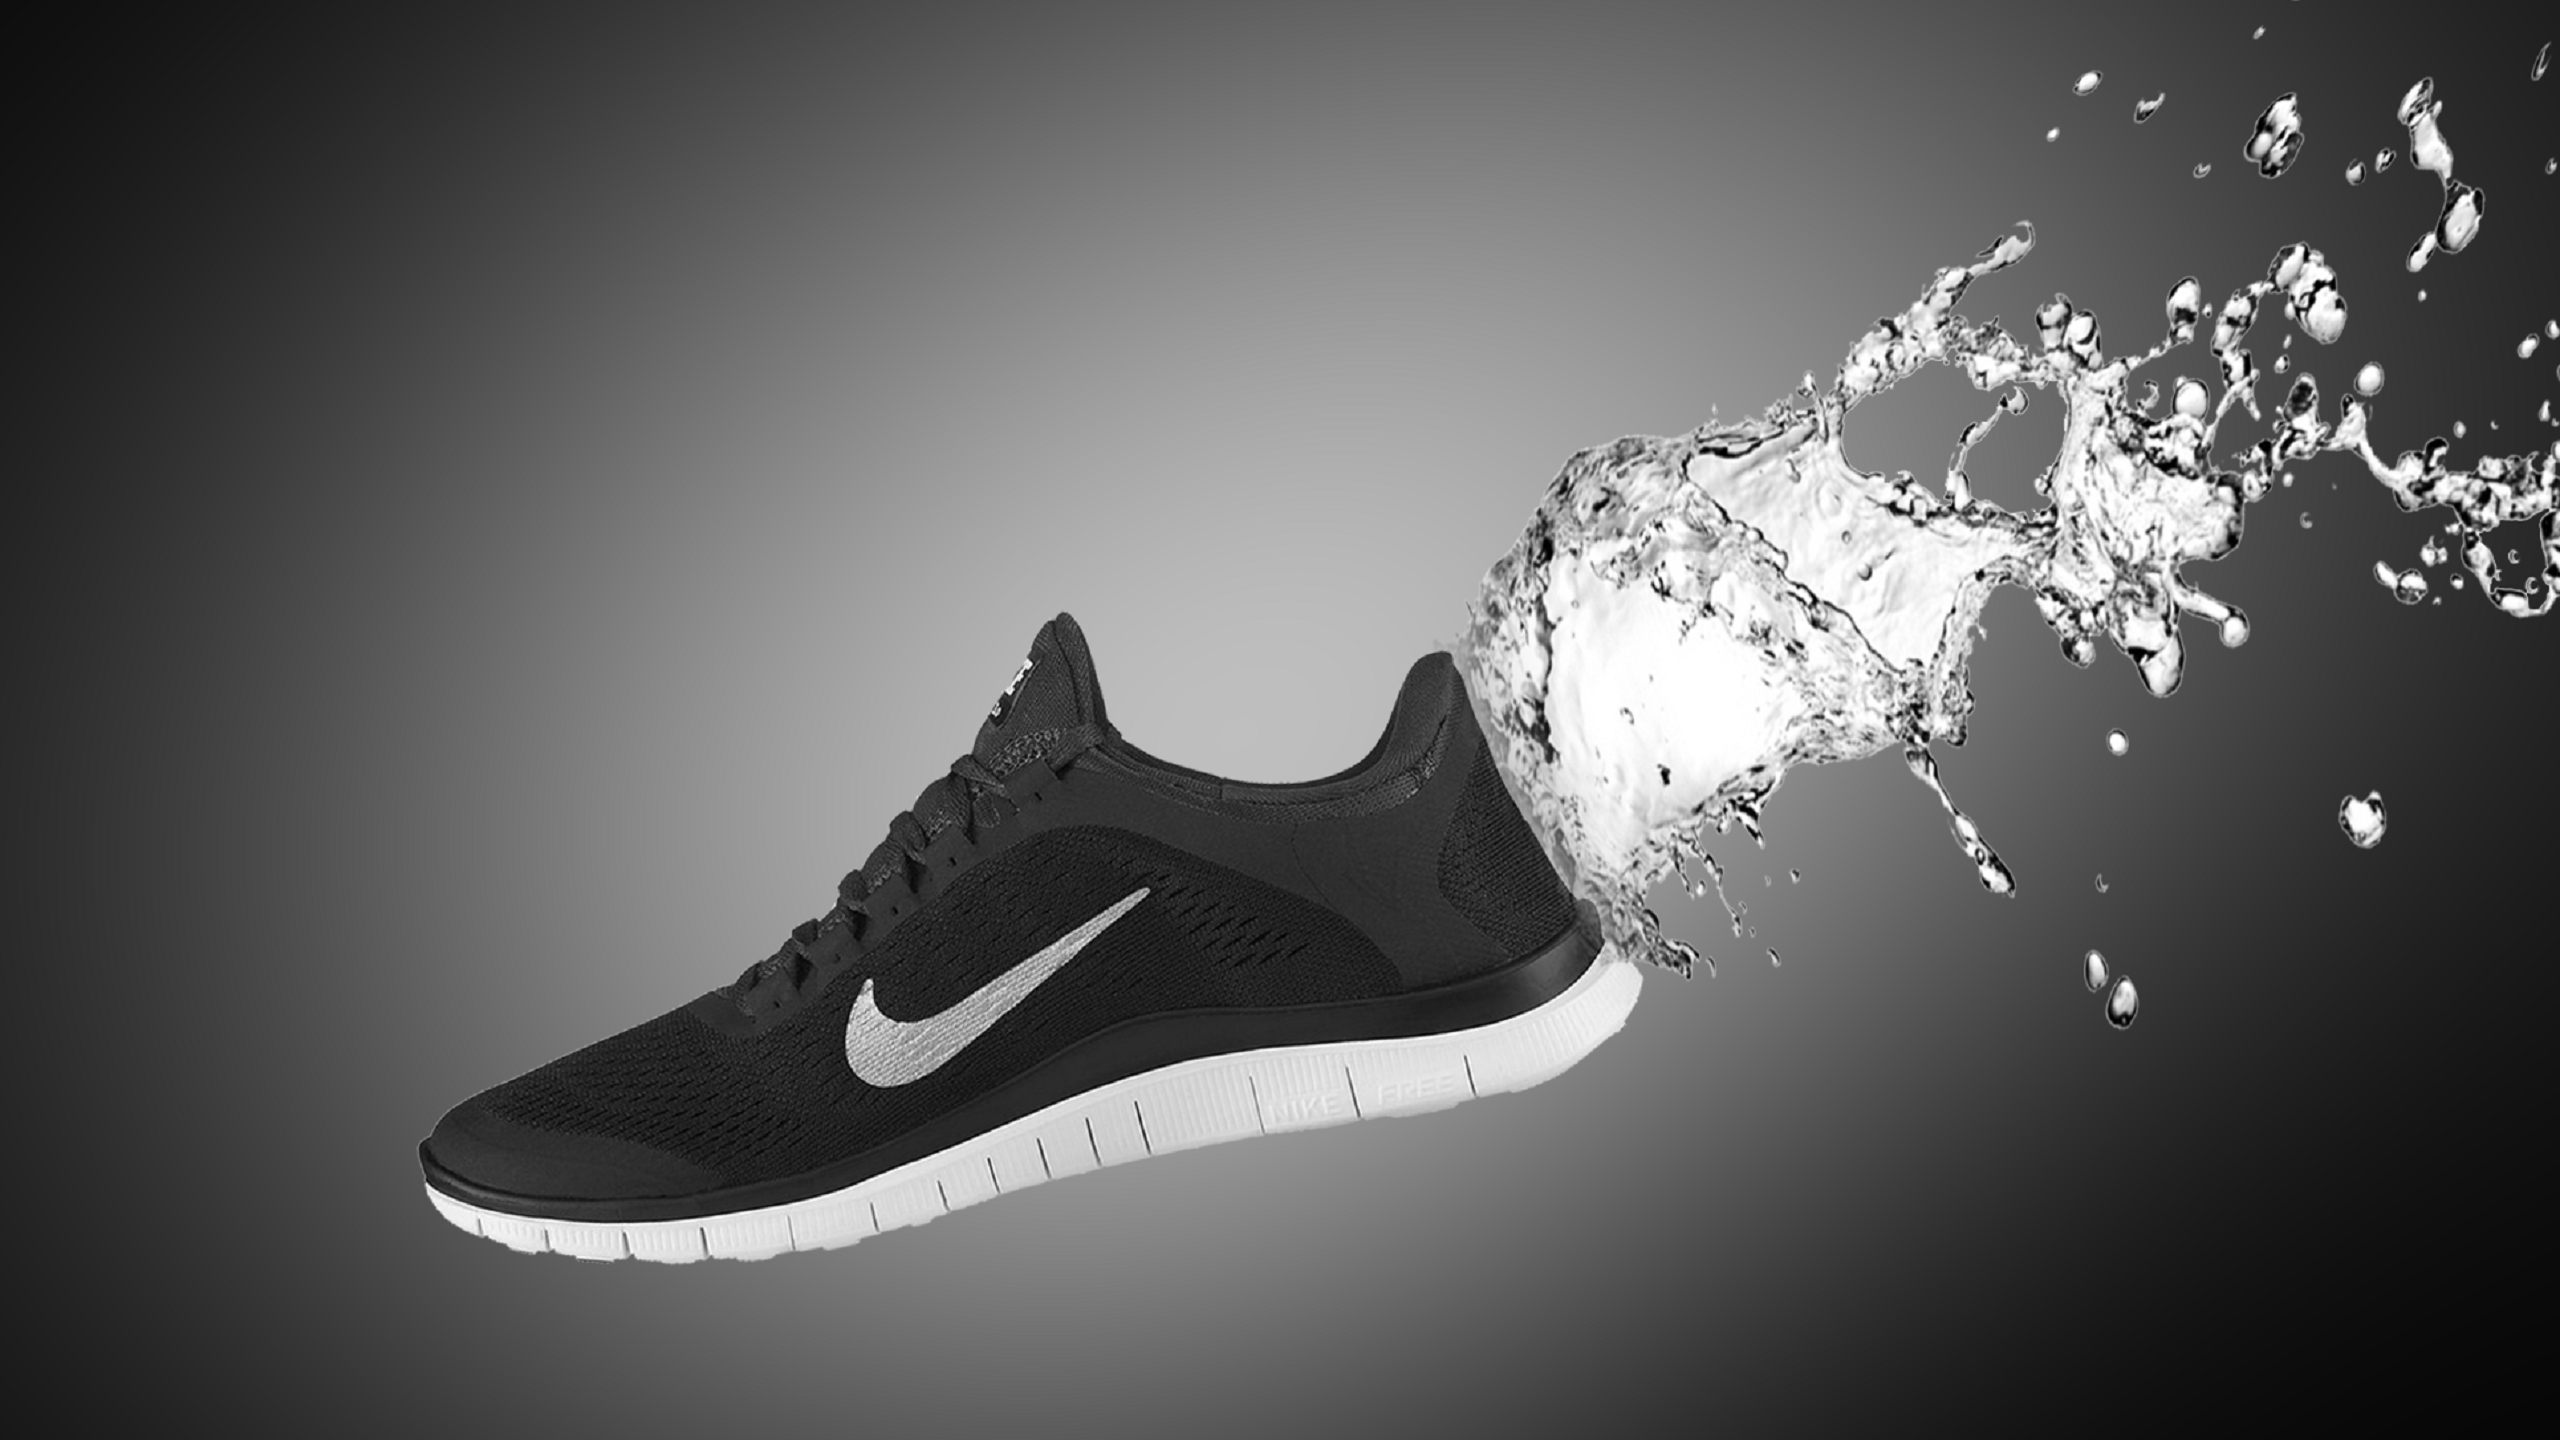 Nike Just Did It! Shoe Giant Says Will Longer Supply to Israeli - The Media Line